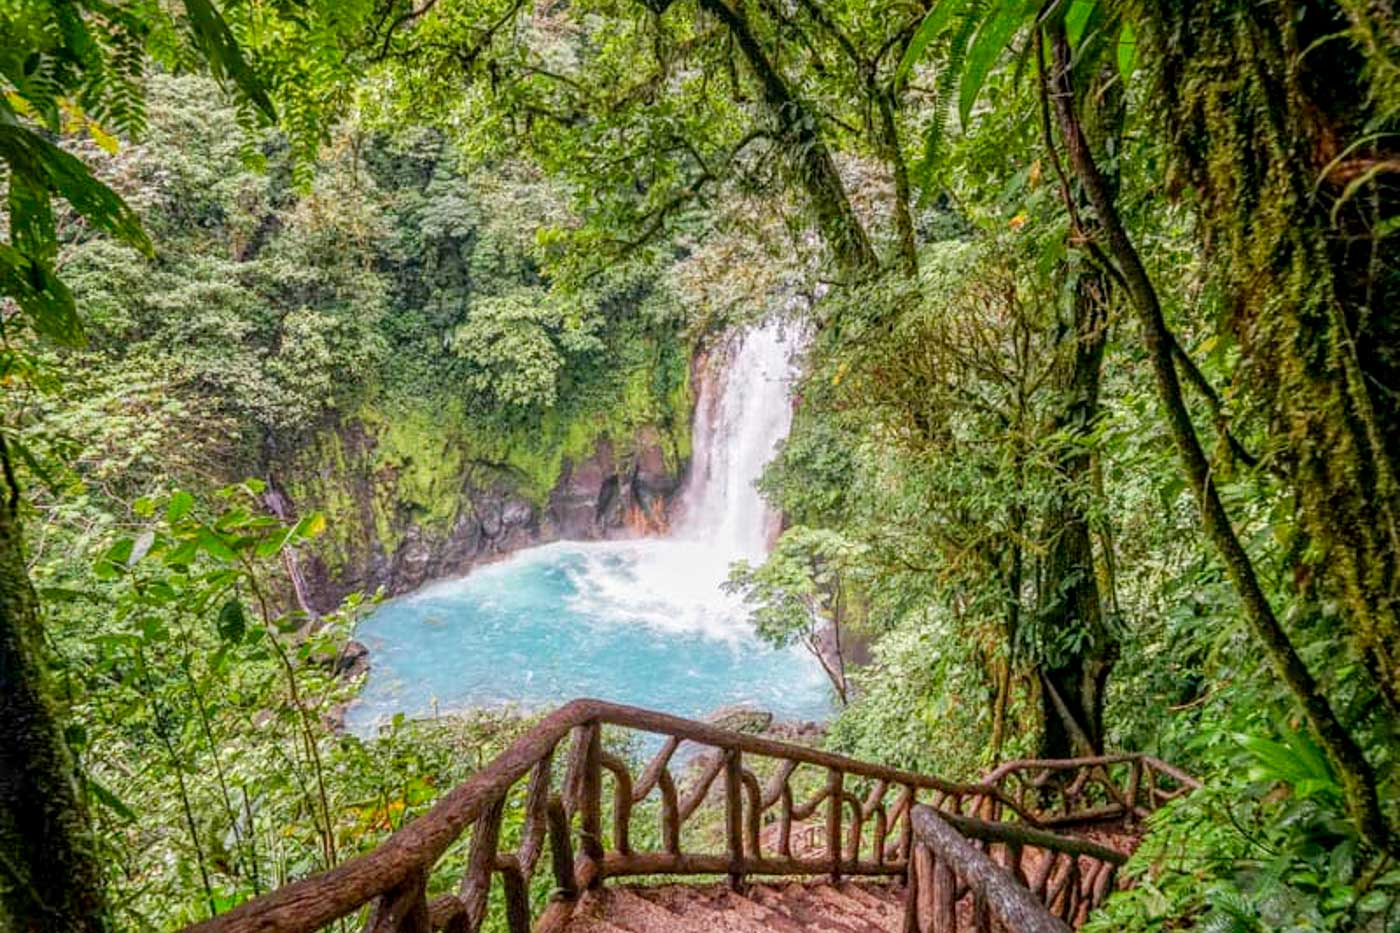 How to Visit Rio Celeste Waterfall in Costa Rica